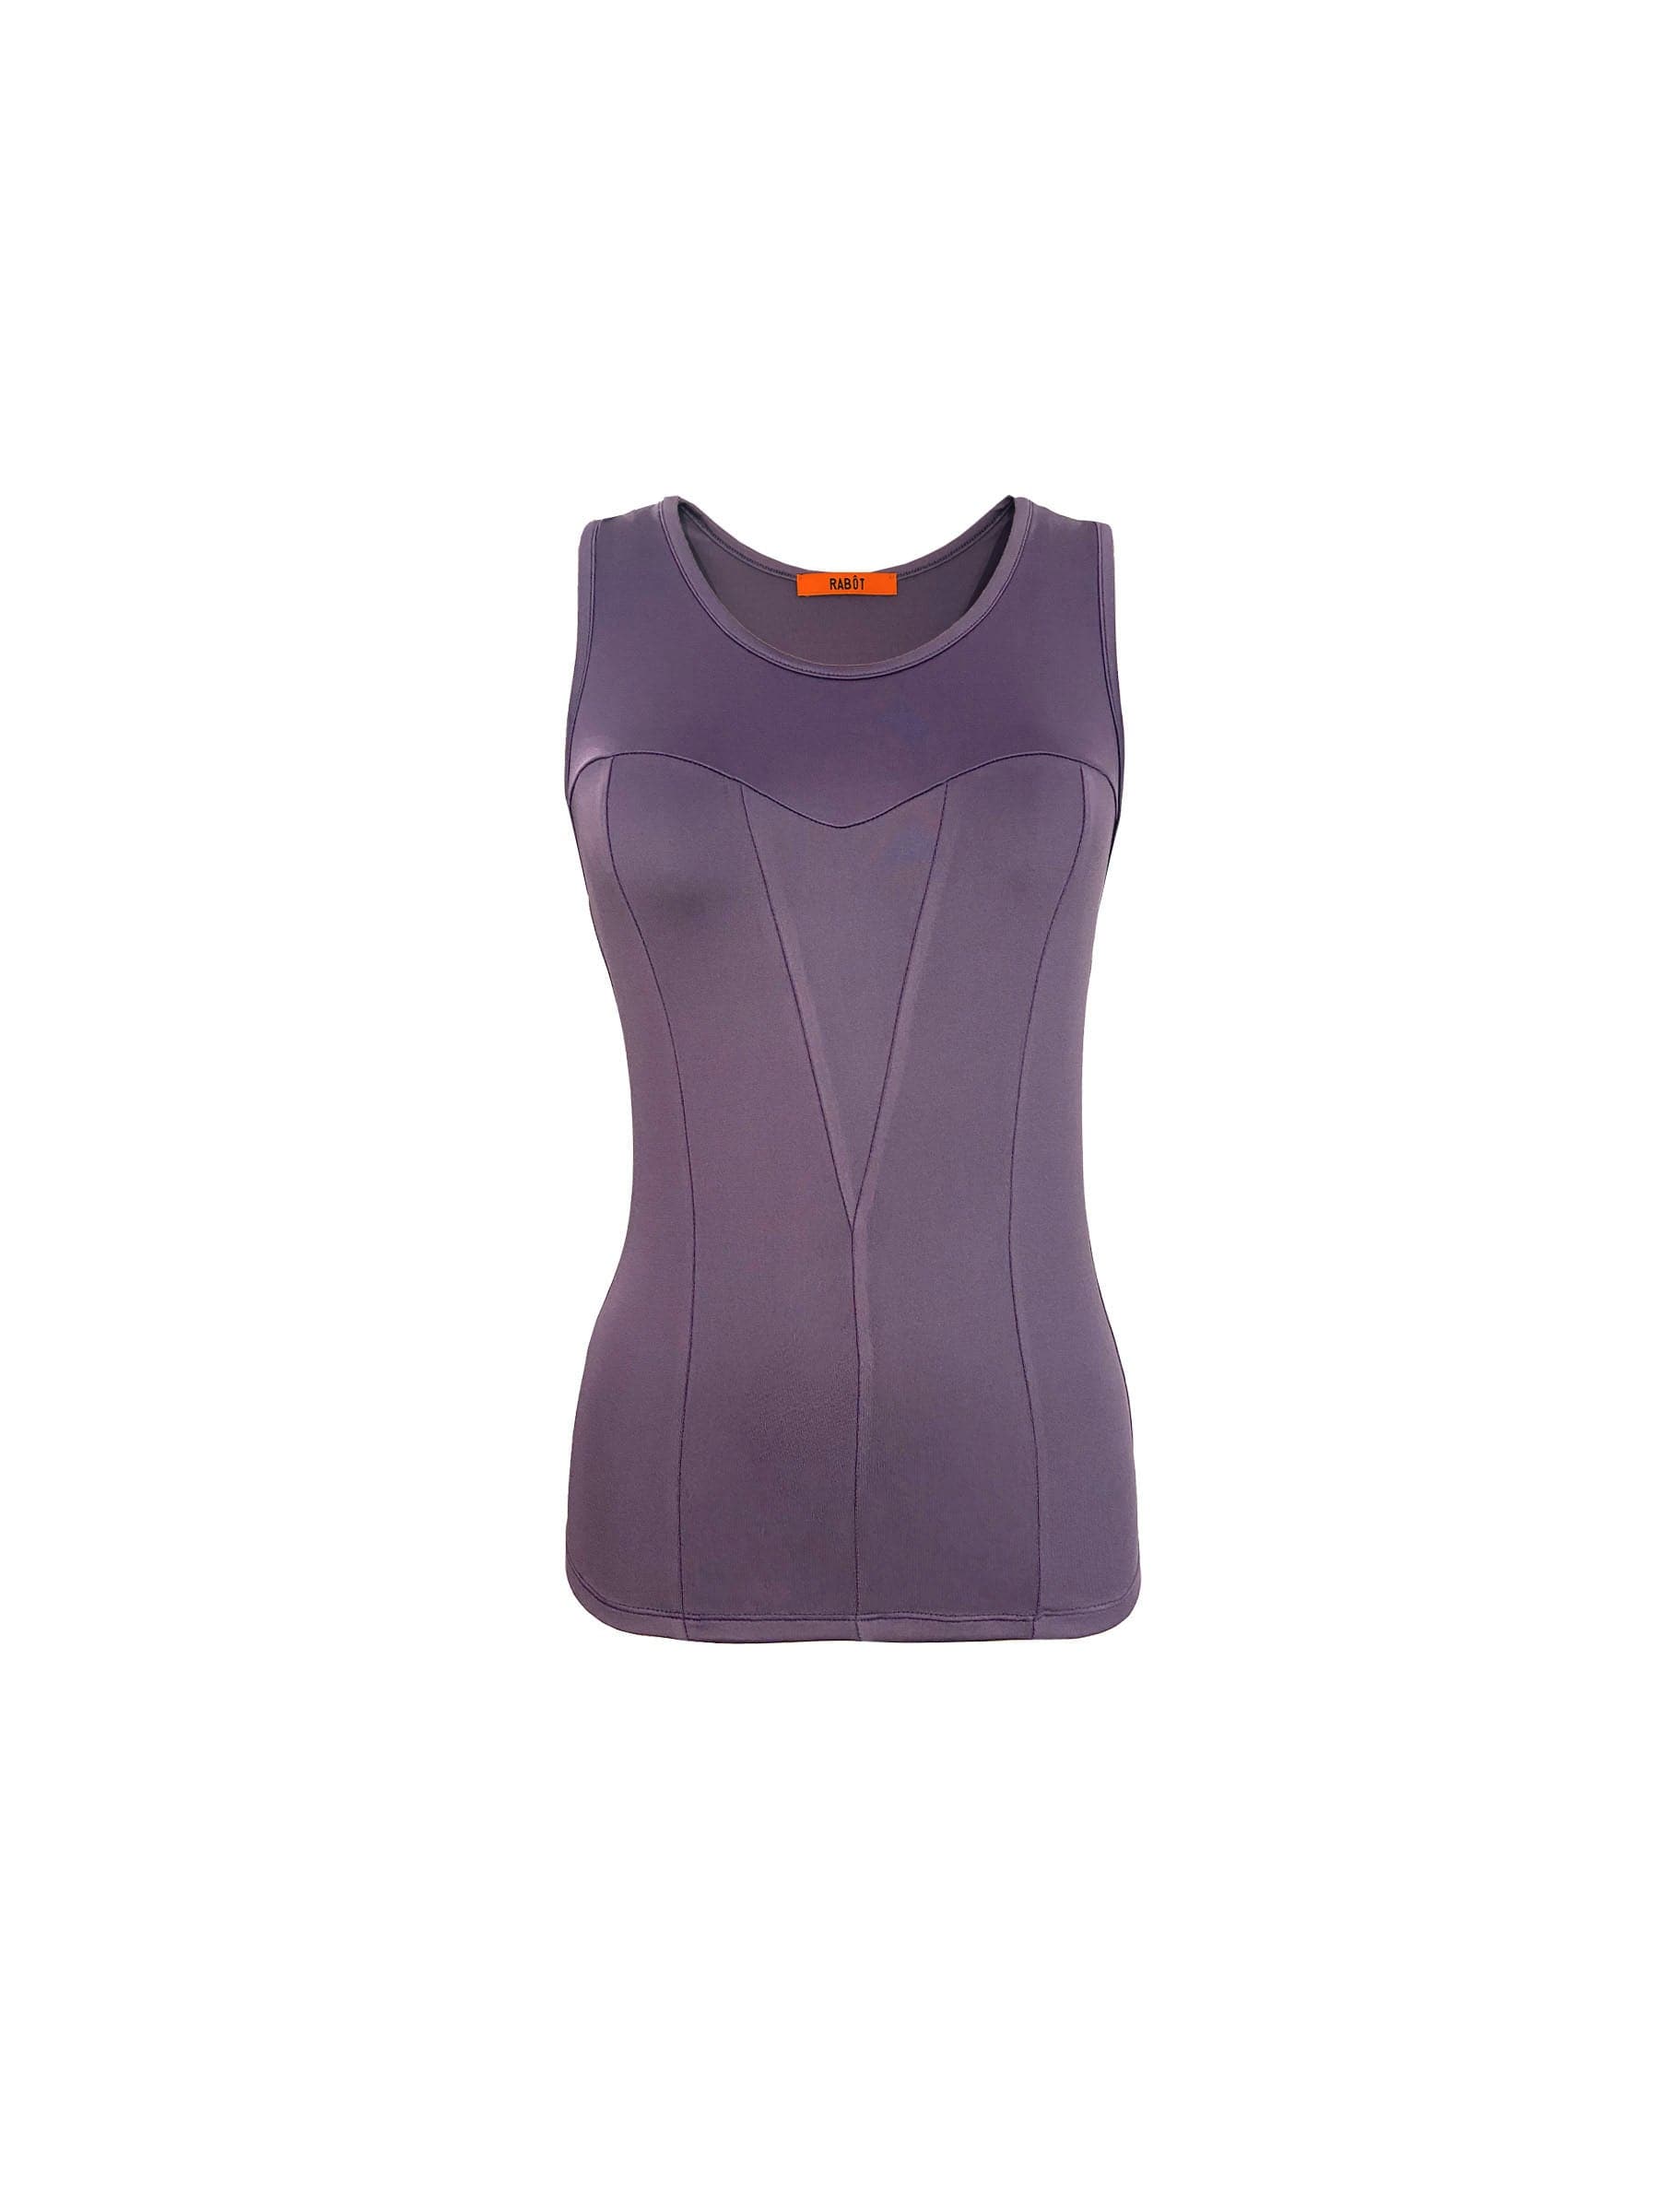 RECYCLED POLY PURPLE CORSET TANK TOP